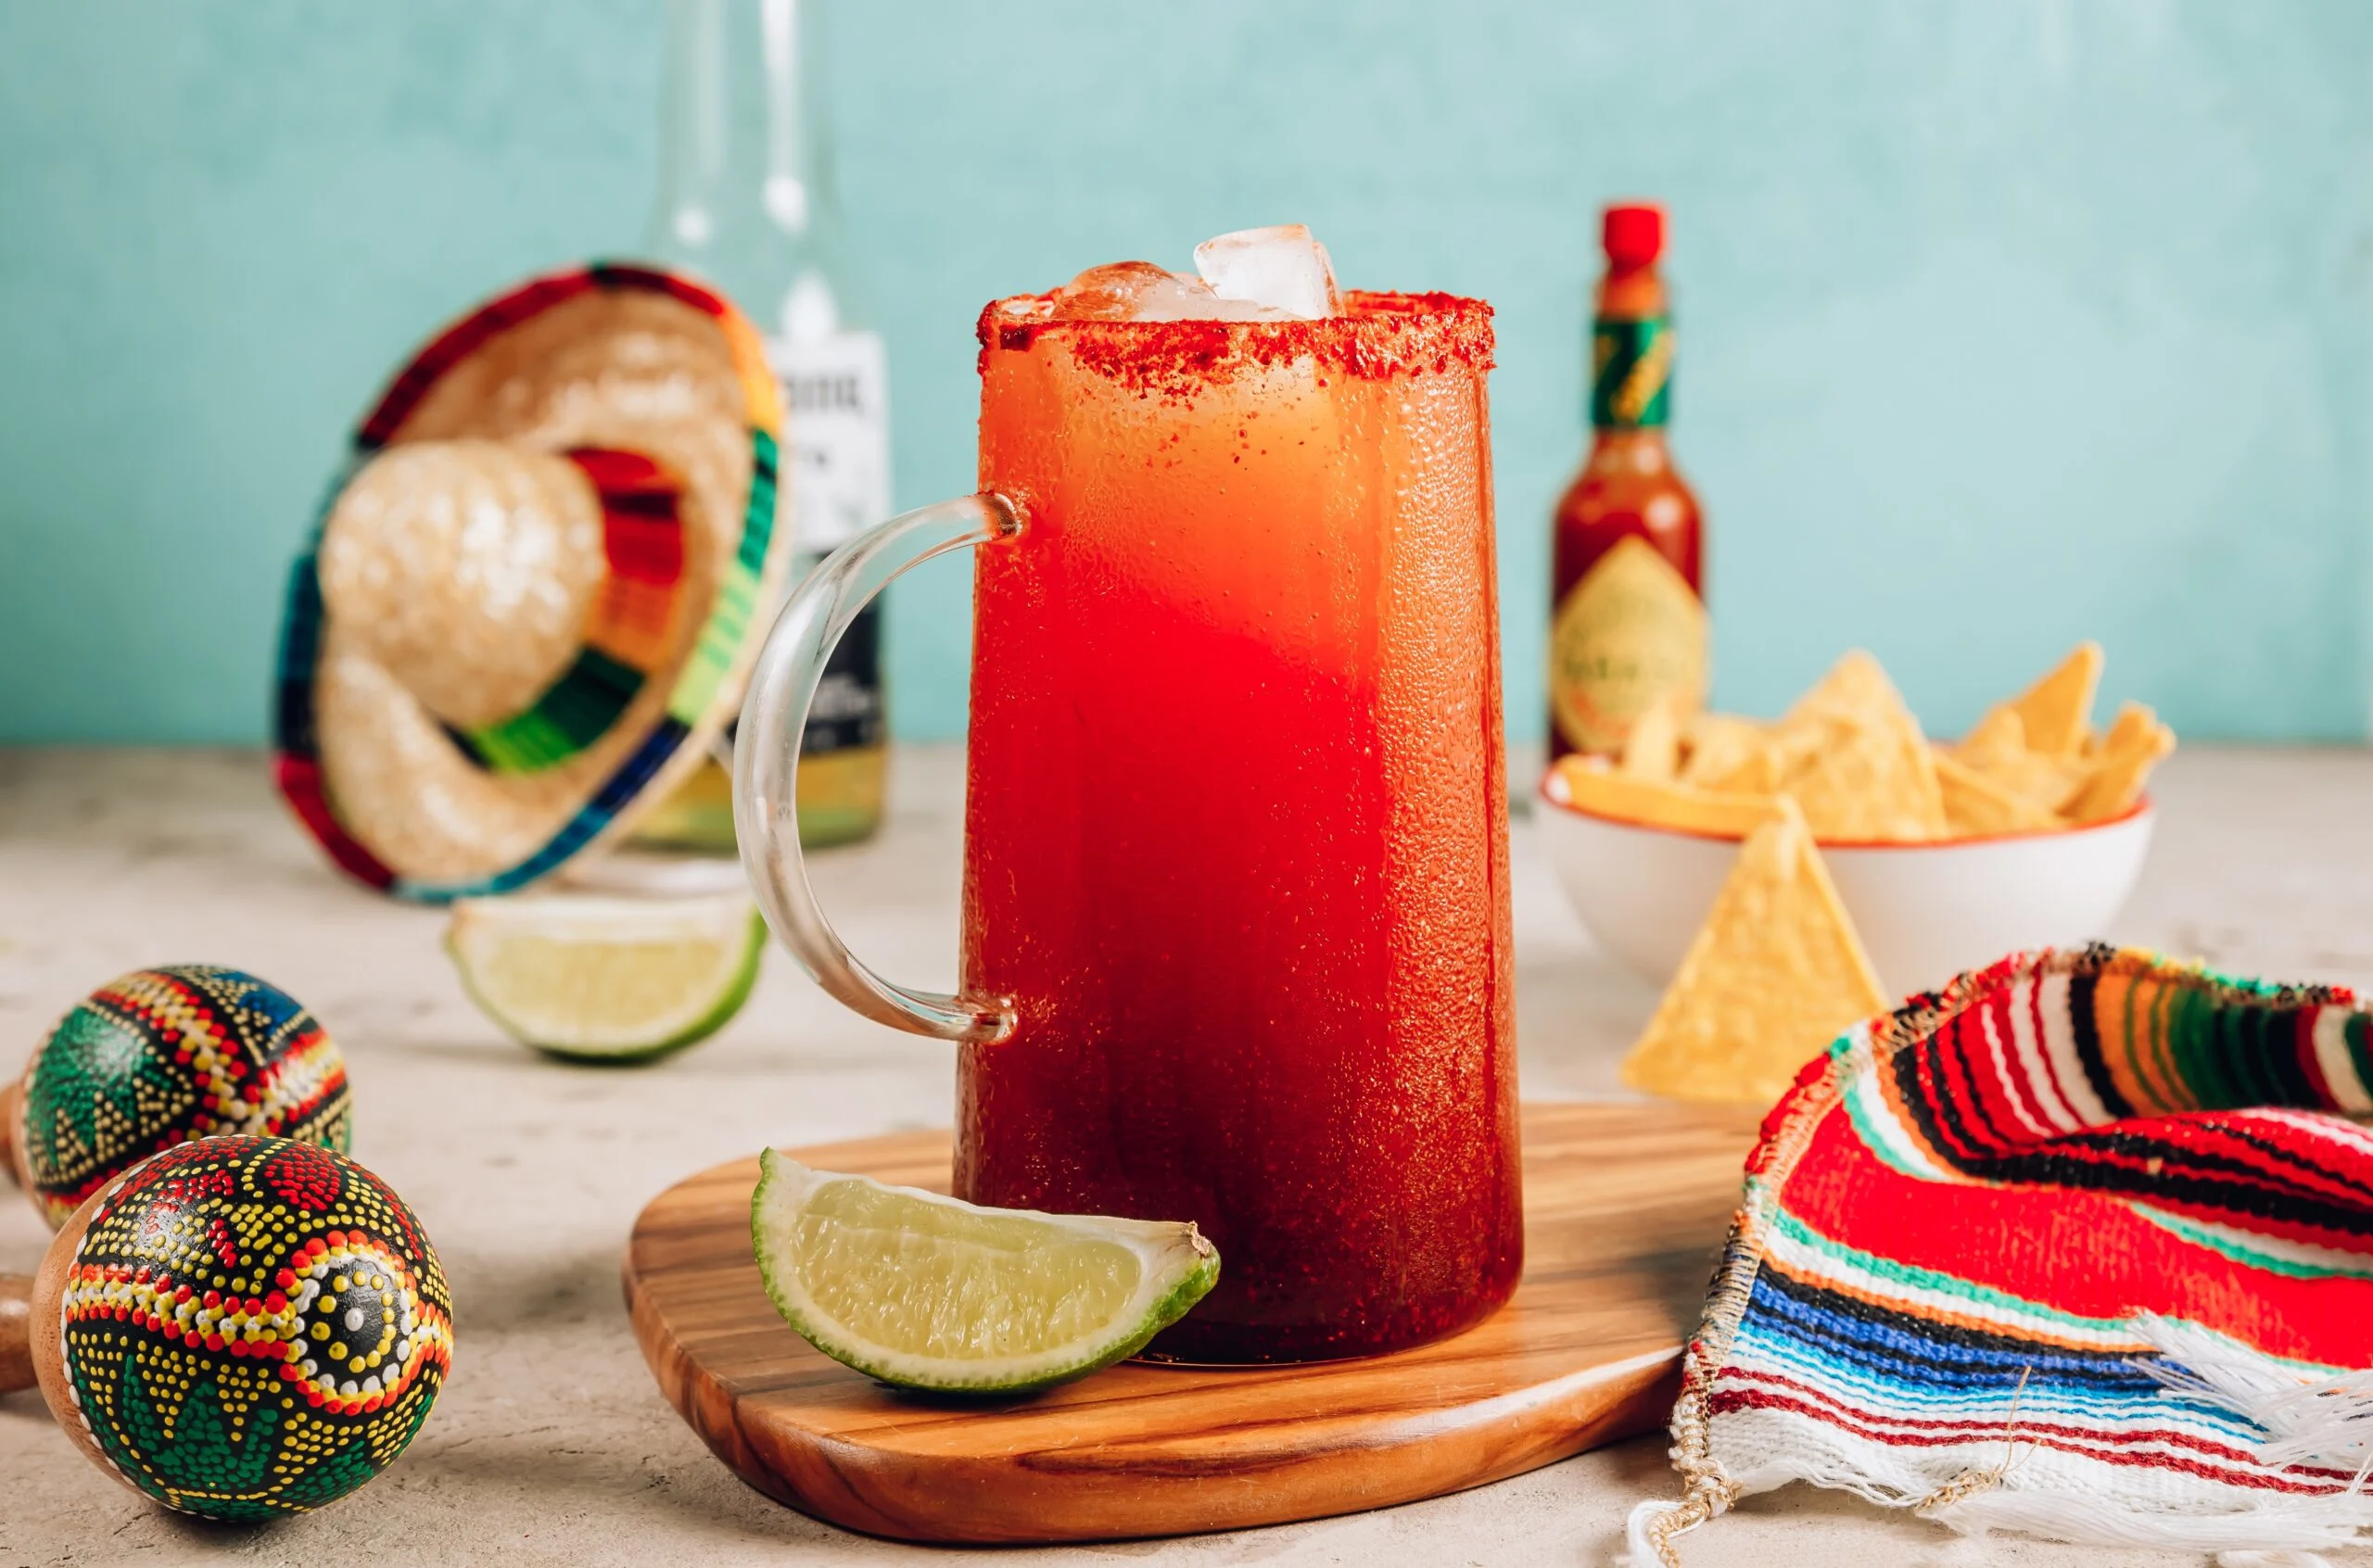 The famous Michelada - my favourite hangover cure! 